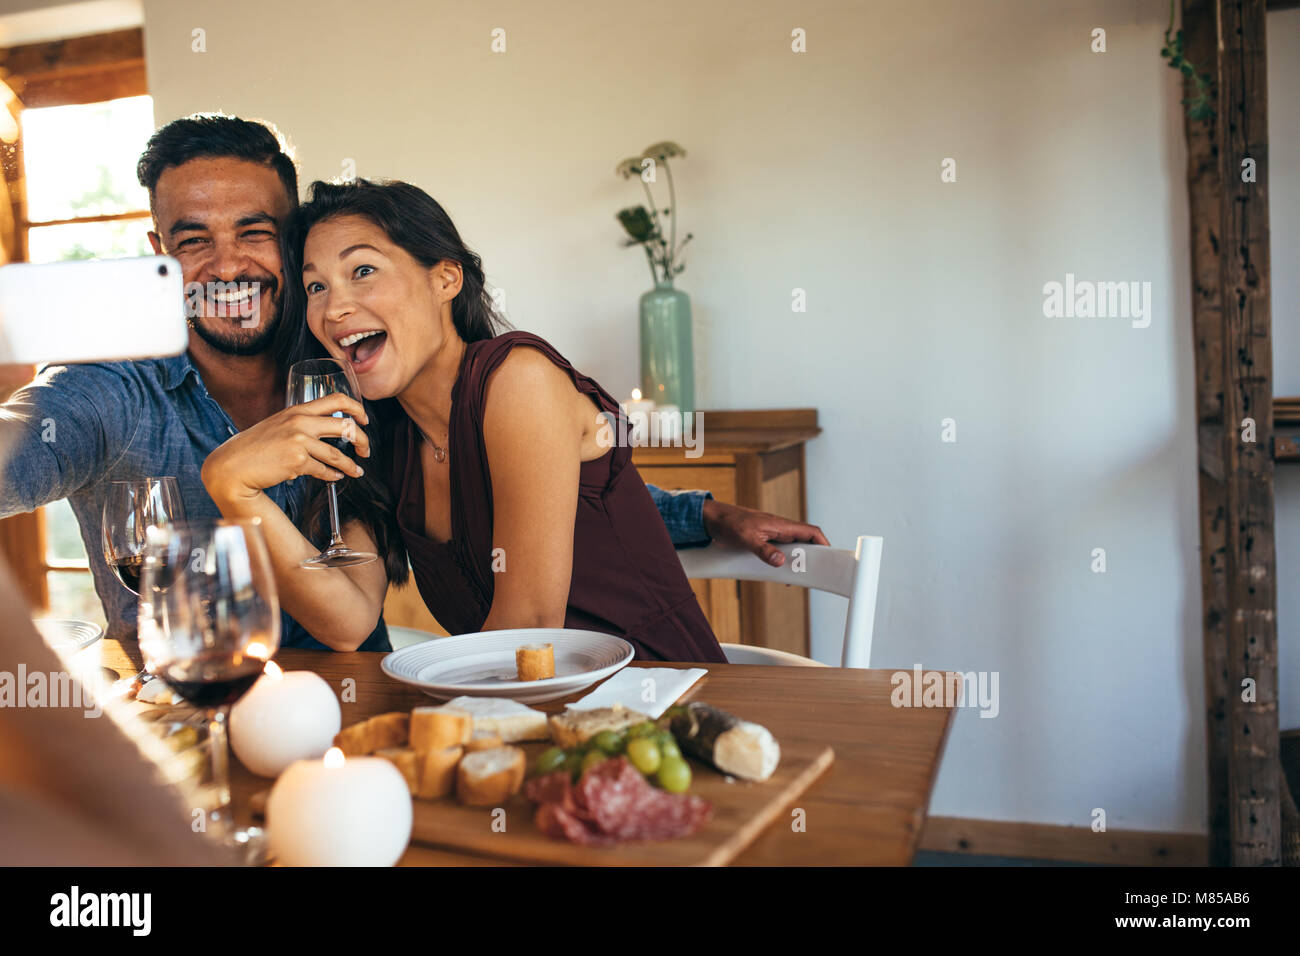 Young man and woman sitting at dining table laughing while taking selfie. Couple enjoying party at home. Stock Photo